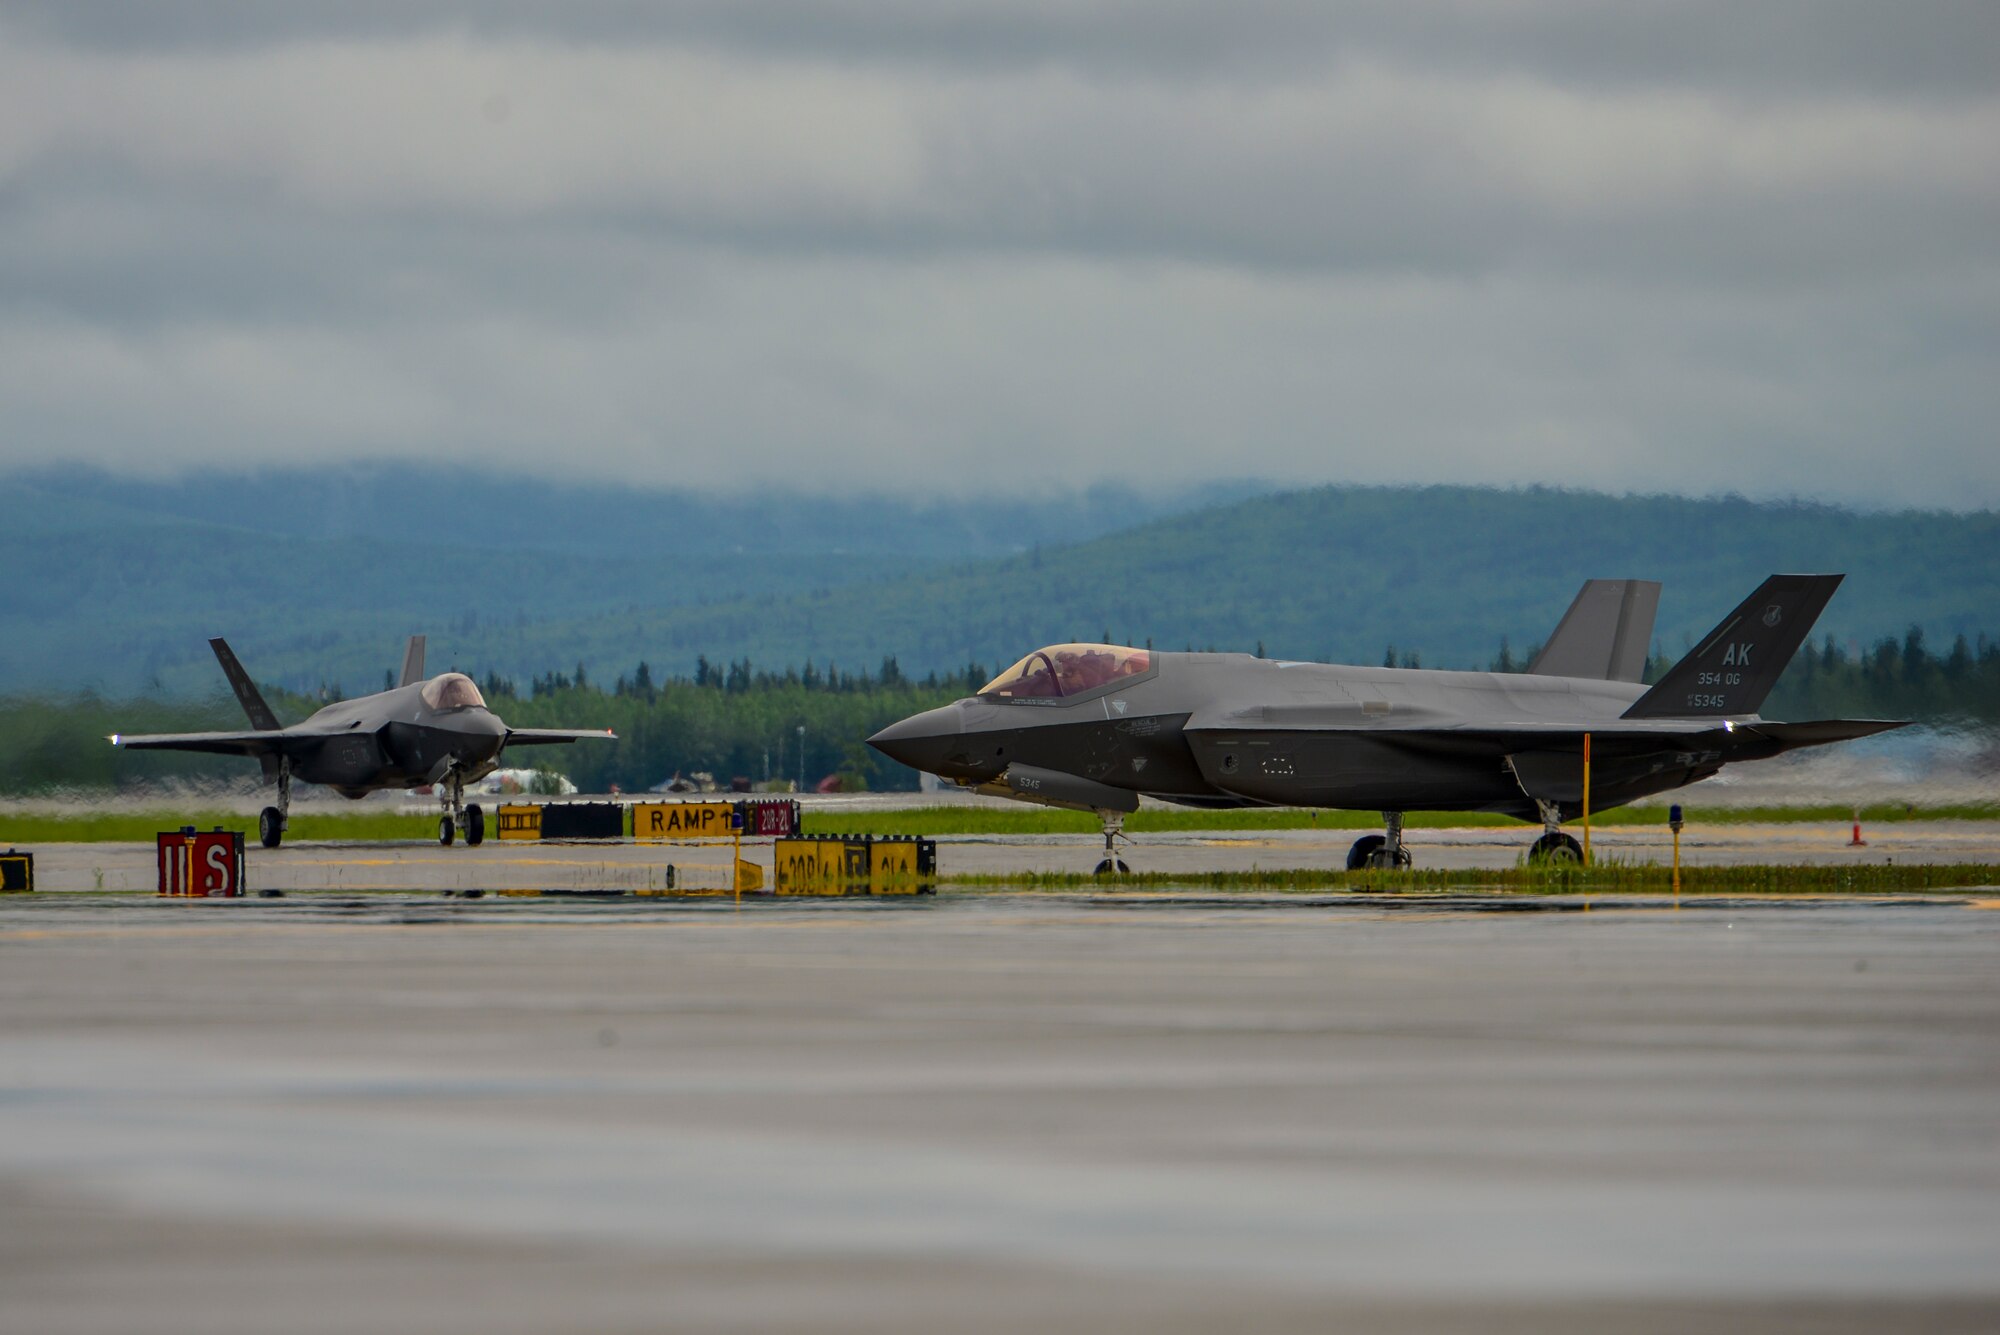 Two U.S. Air Force F-35A Lightning IIs assigned to the 356th Fighter Squadron taxi on the Fairbanks International Airport (FAI) runway at Fairbanks, Alaska, June 24, 2020.